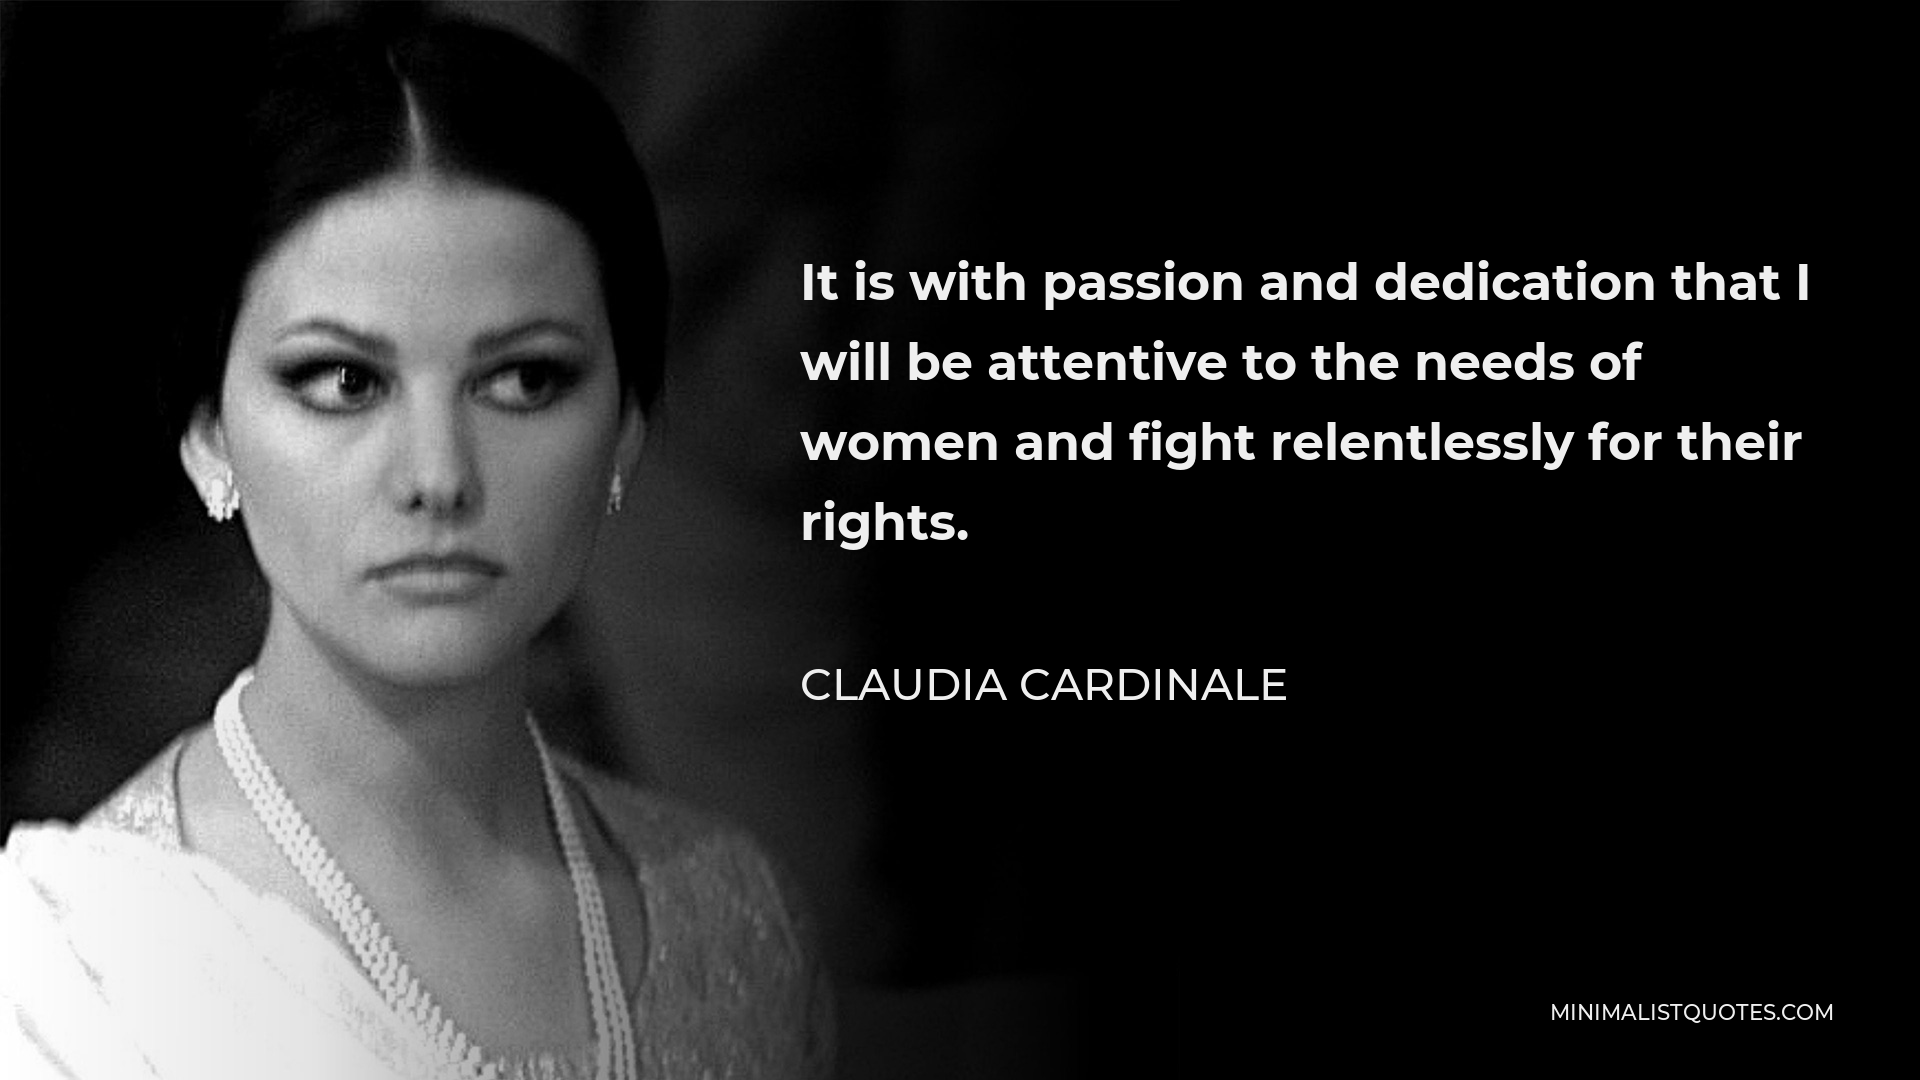 Claudia Cardinale Quote - It is with passion and dedication that I will be attentive to the needs of women and fight relentlessly for their rights.